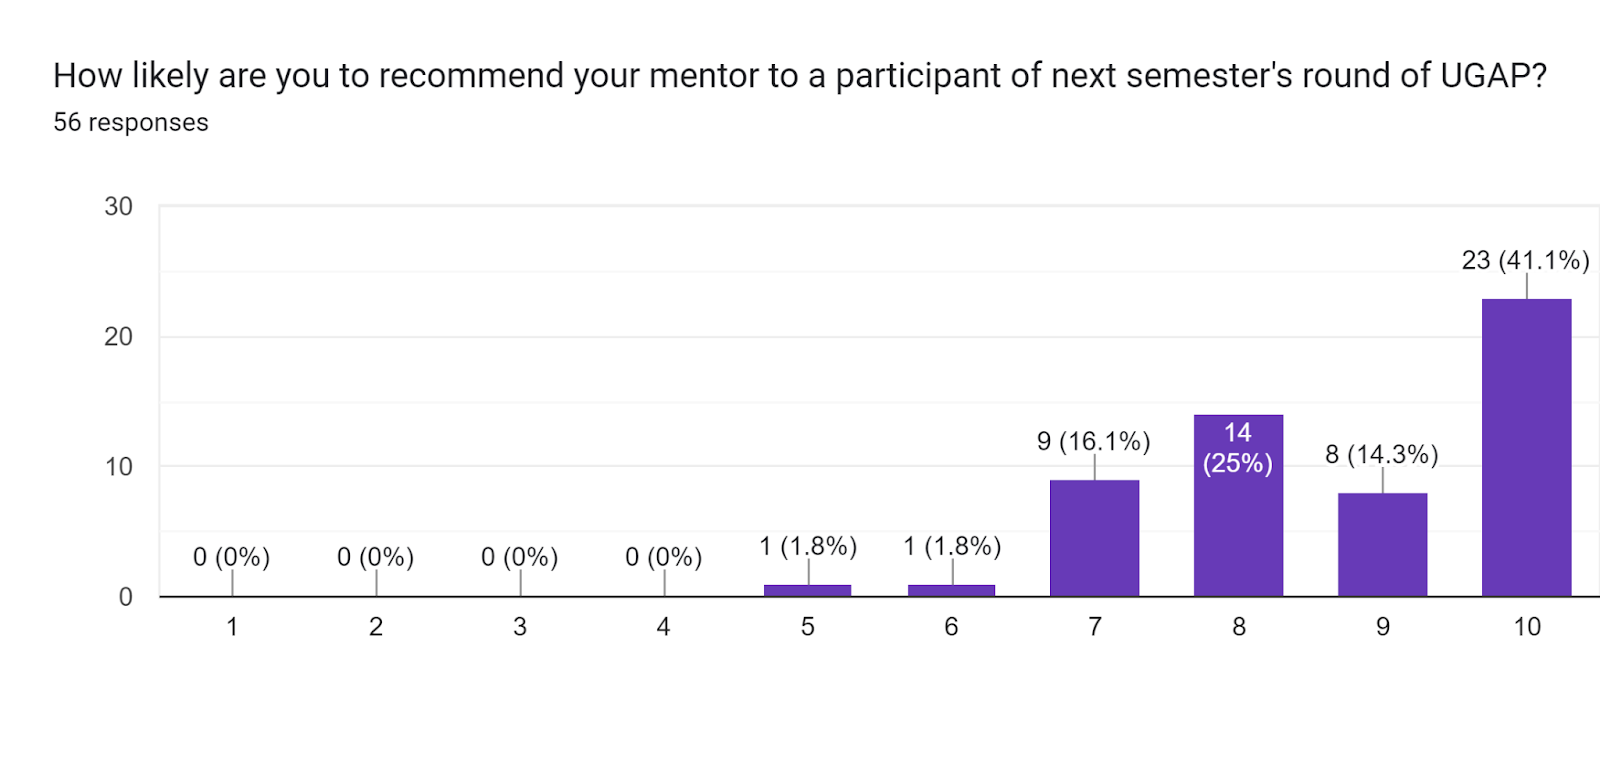 Forms response chart. Question title: How likely are you to recommend your mentor to a participant of next semester